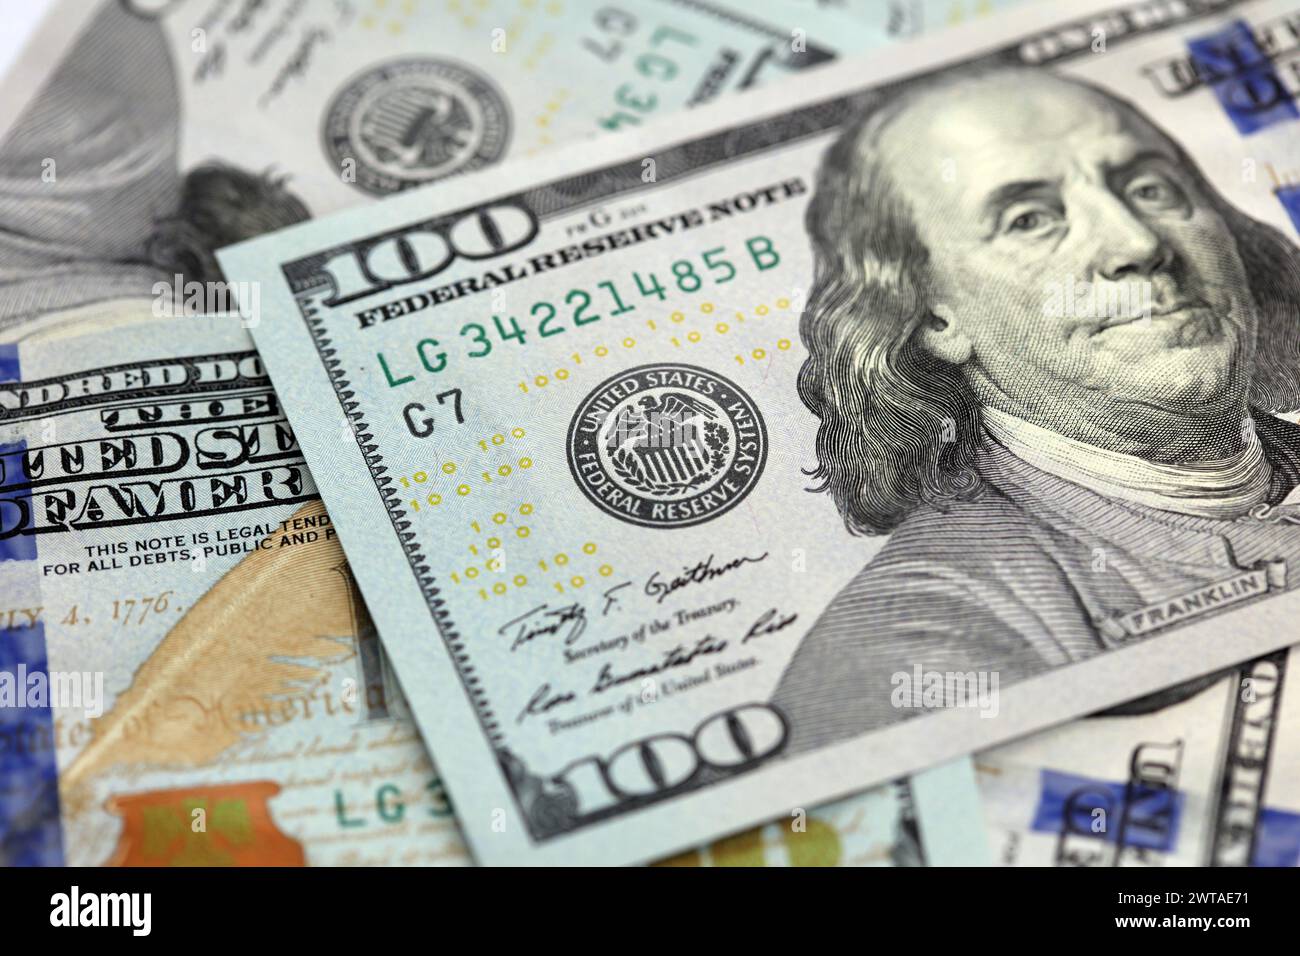 American one hundred dollar notes. Shallow depth of field focus on federal reserve. Angled shot with no complete notes shown. Stock Photo